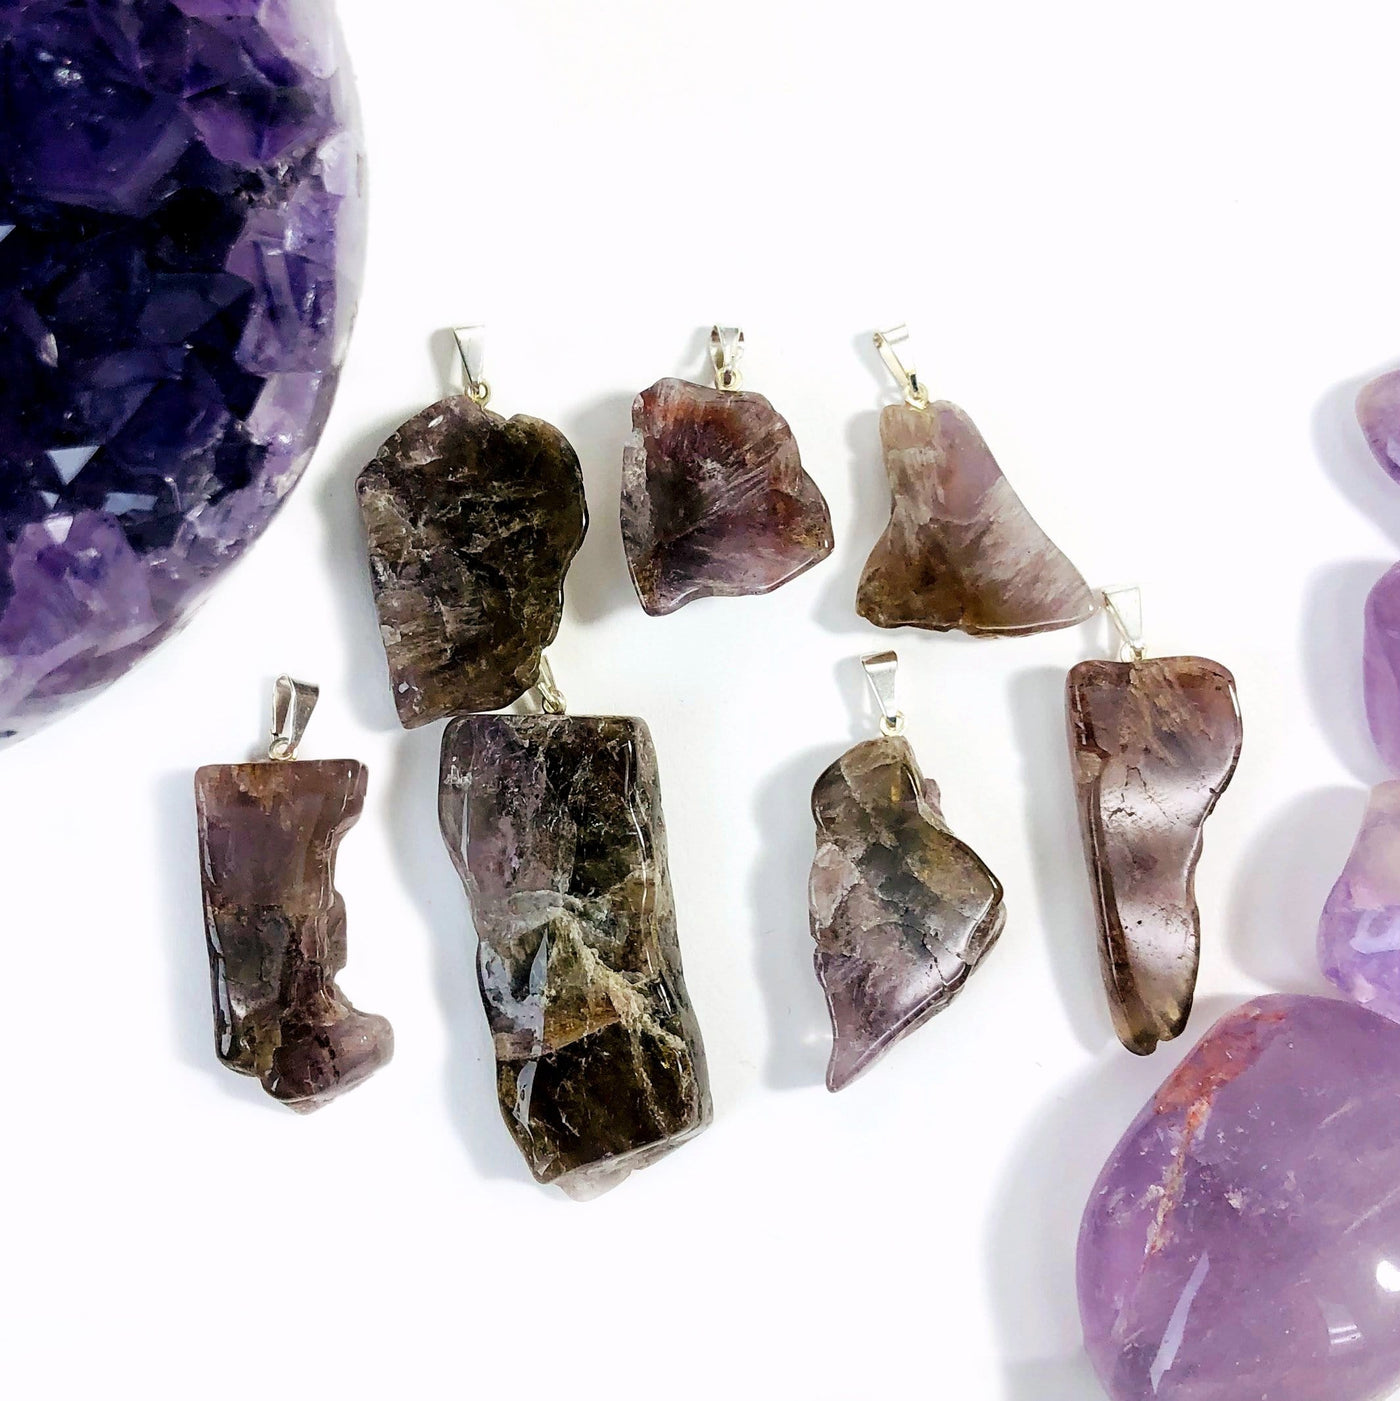 many seven minerals in one stone freeform slab pendants on display for possible variations